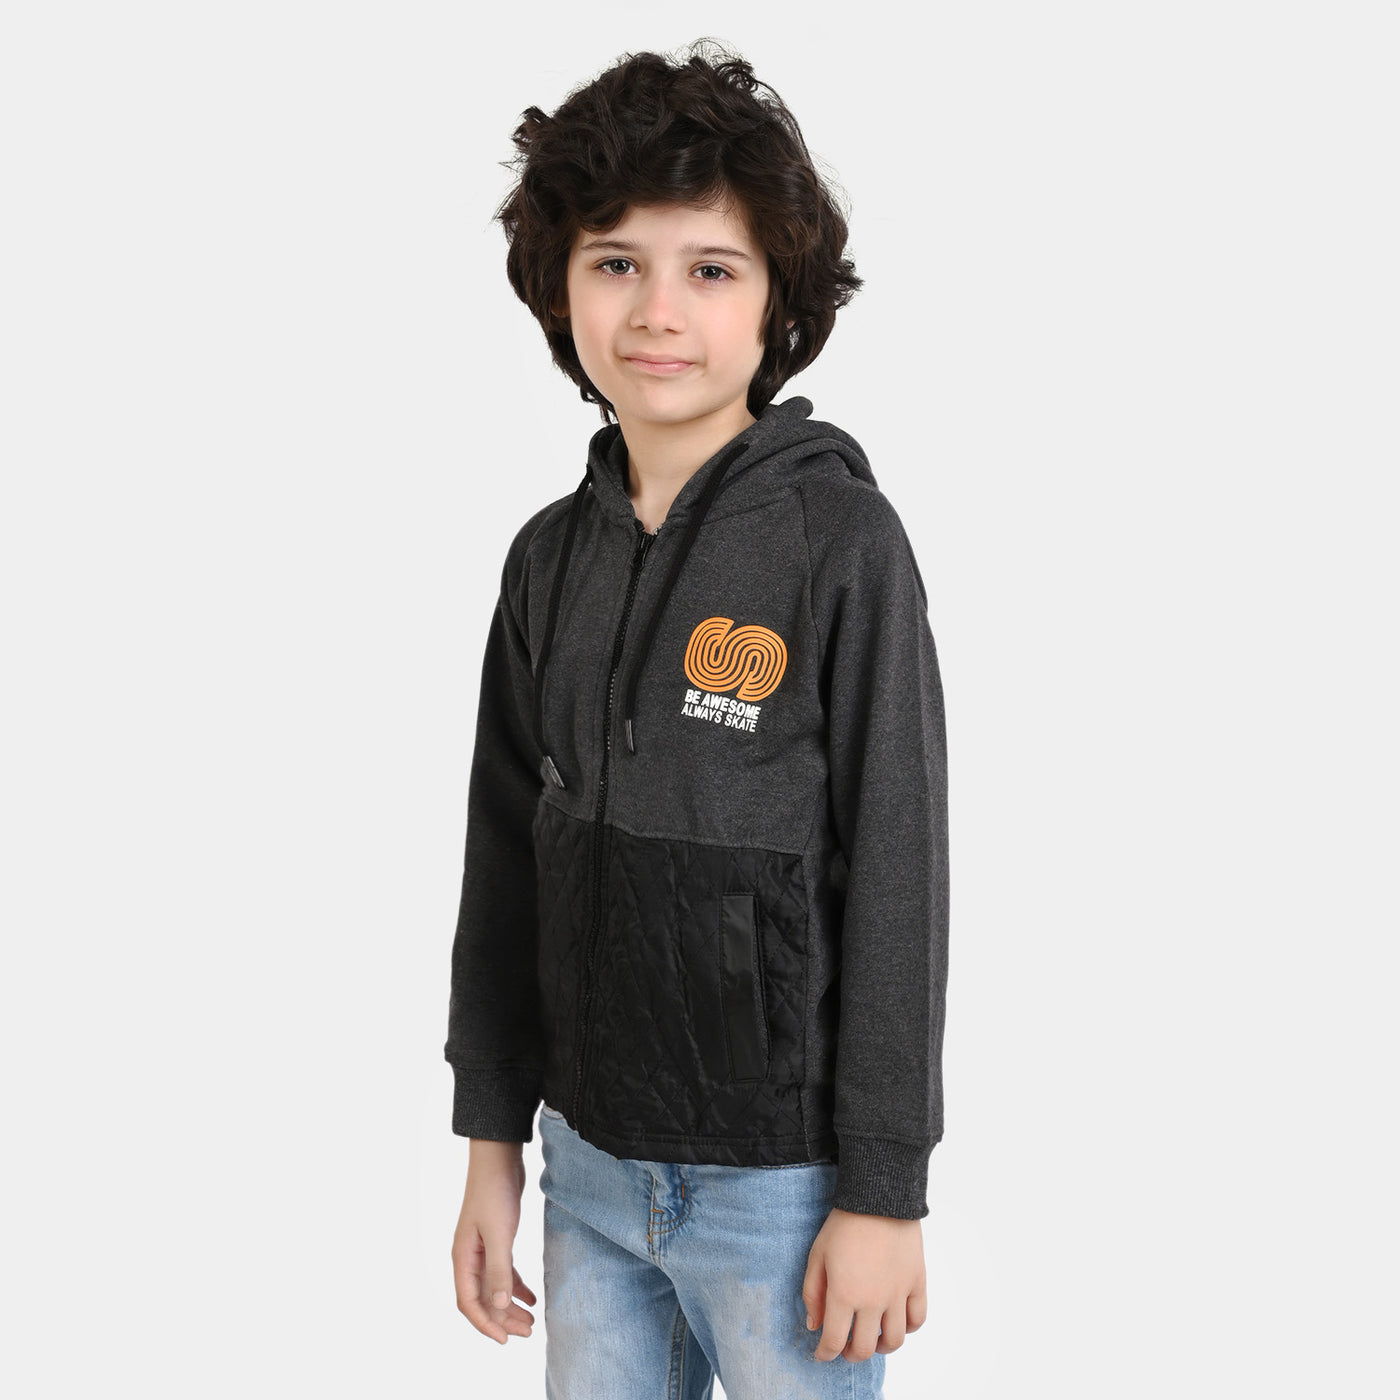 Boys Knitted Jacket Explore 2-CHARCOAL